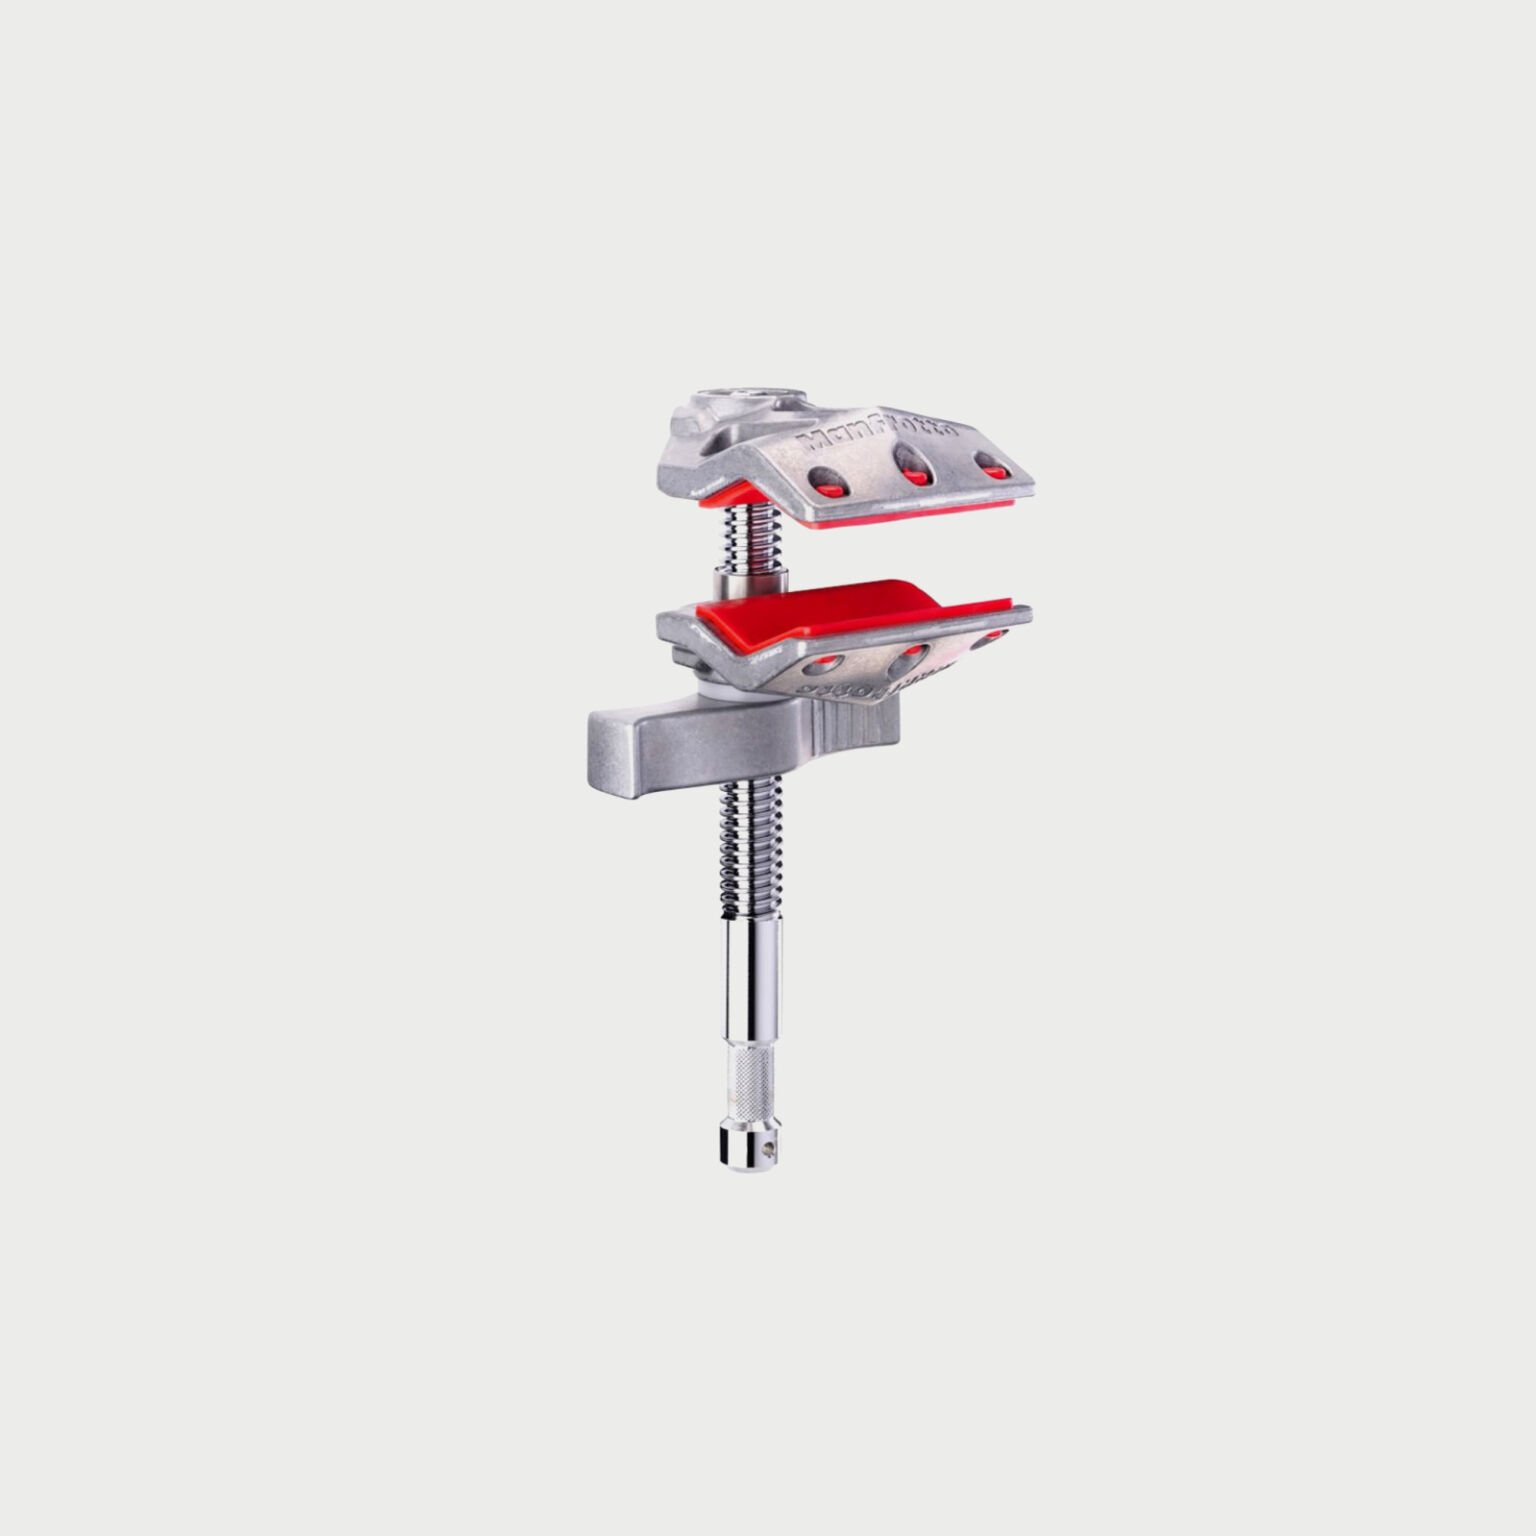 Manfrotto 2 End Vice Jaw Clamp